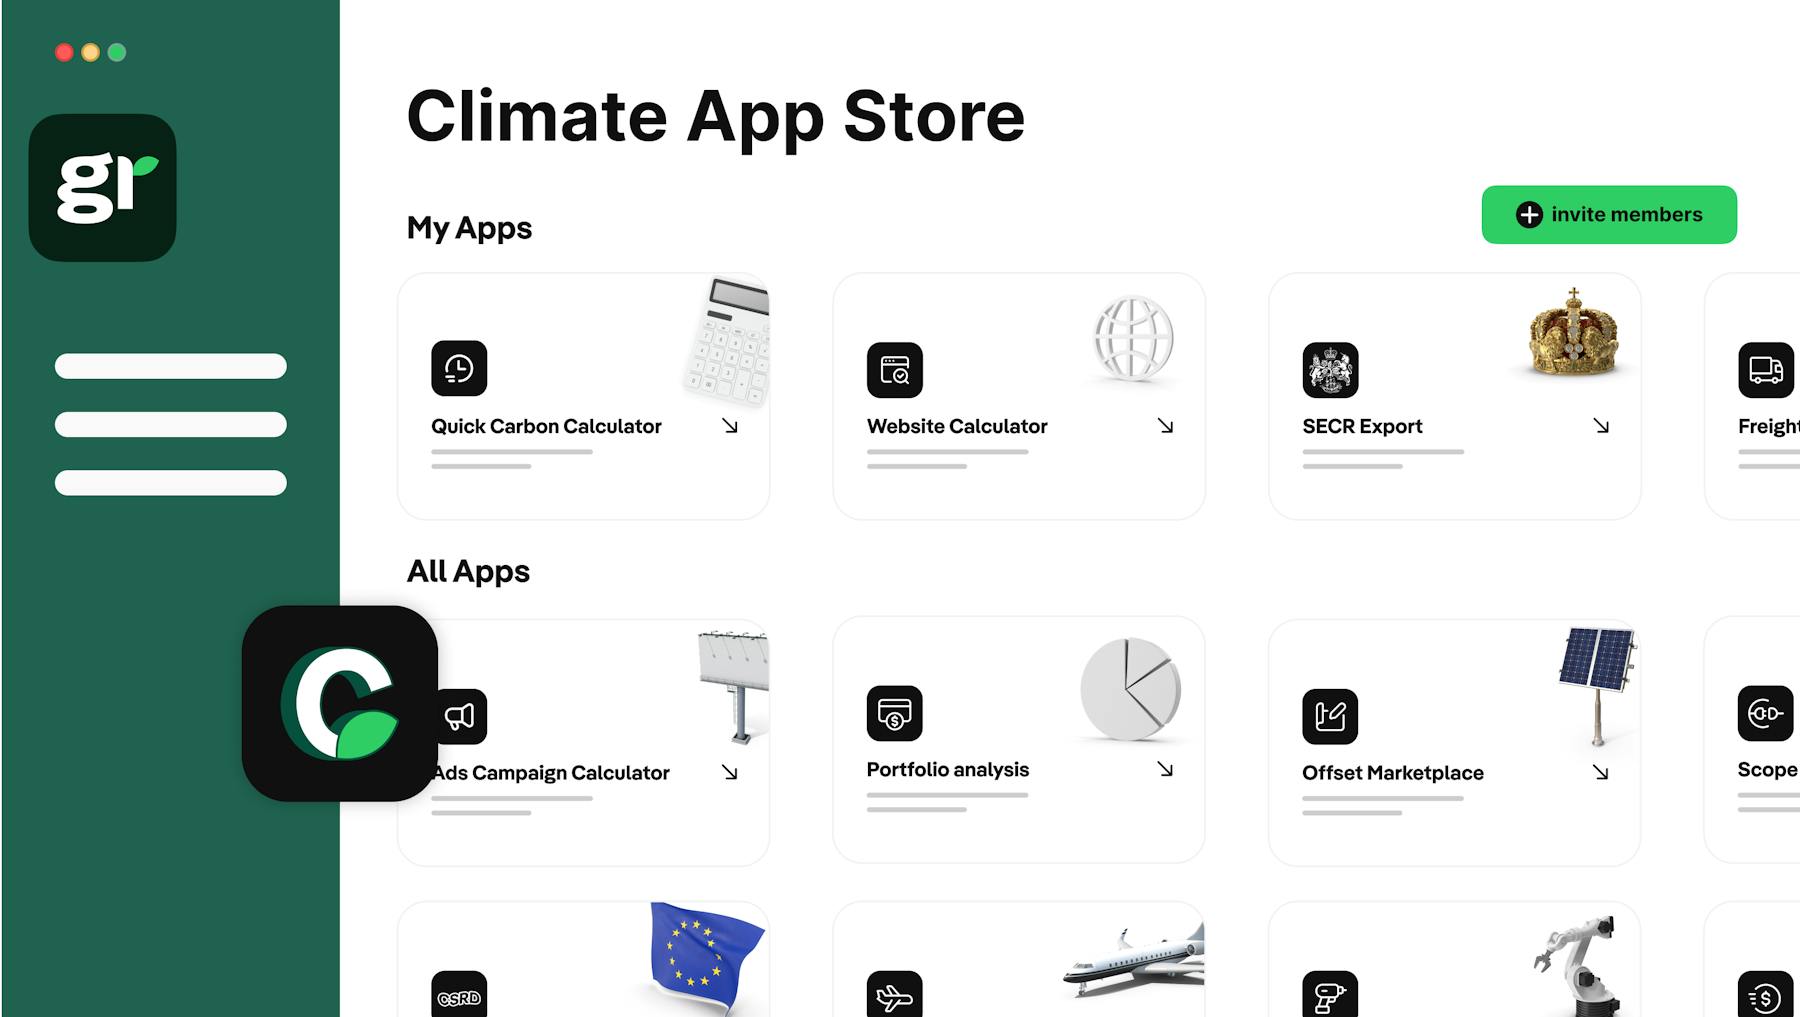 Greenly's Climate App Store homepage